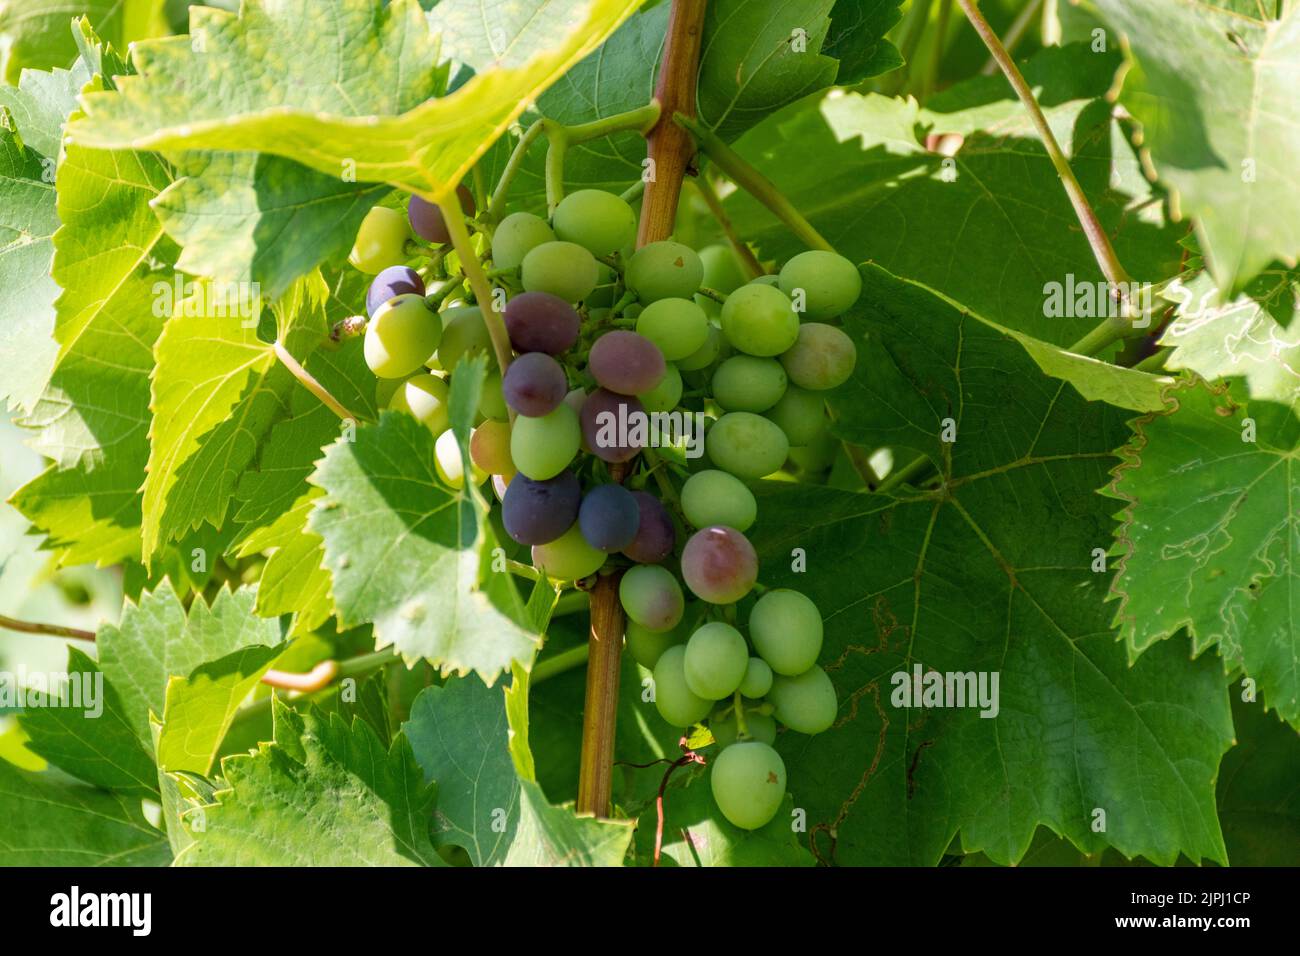 Bunch of grapes Stock Photo